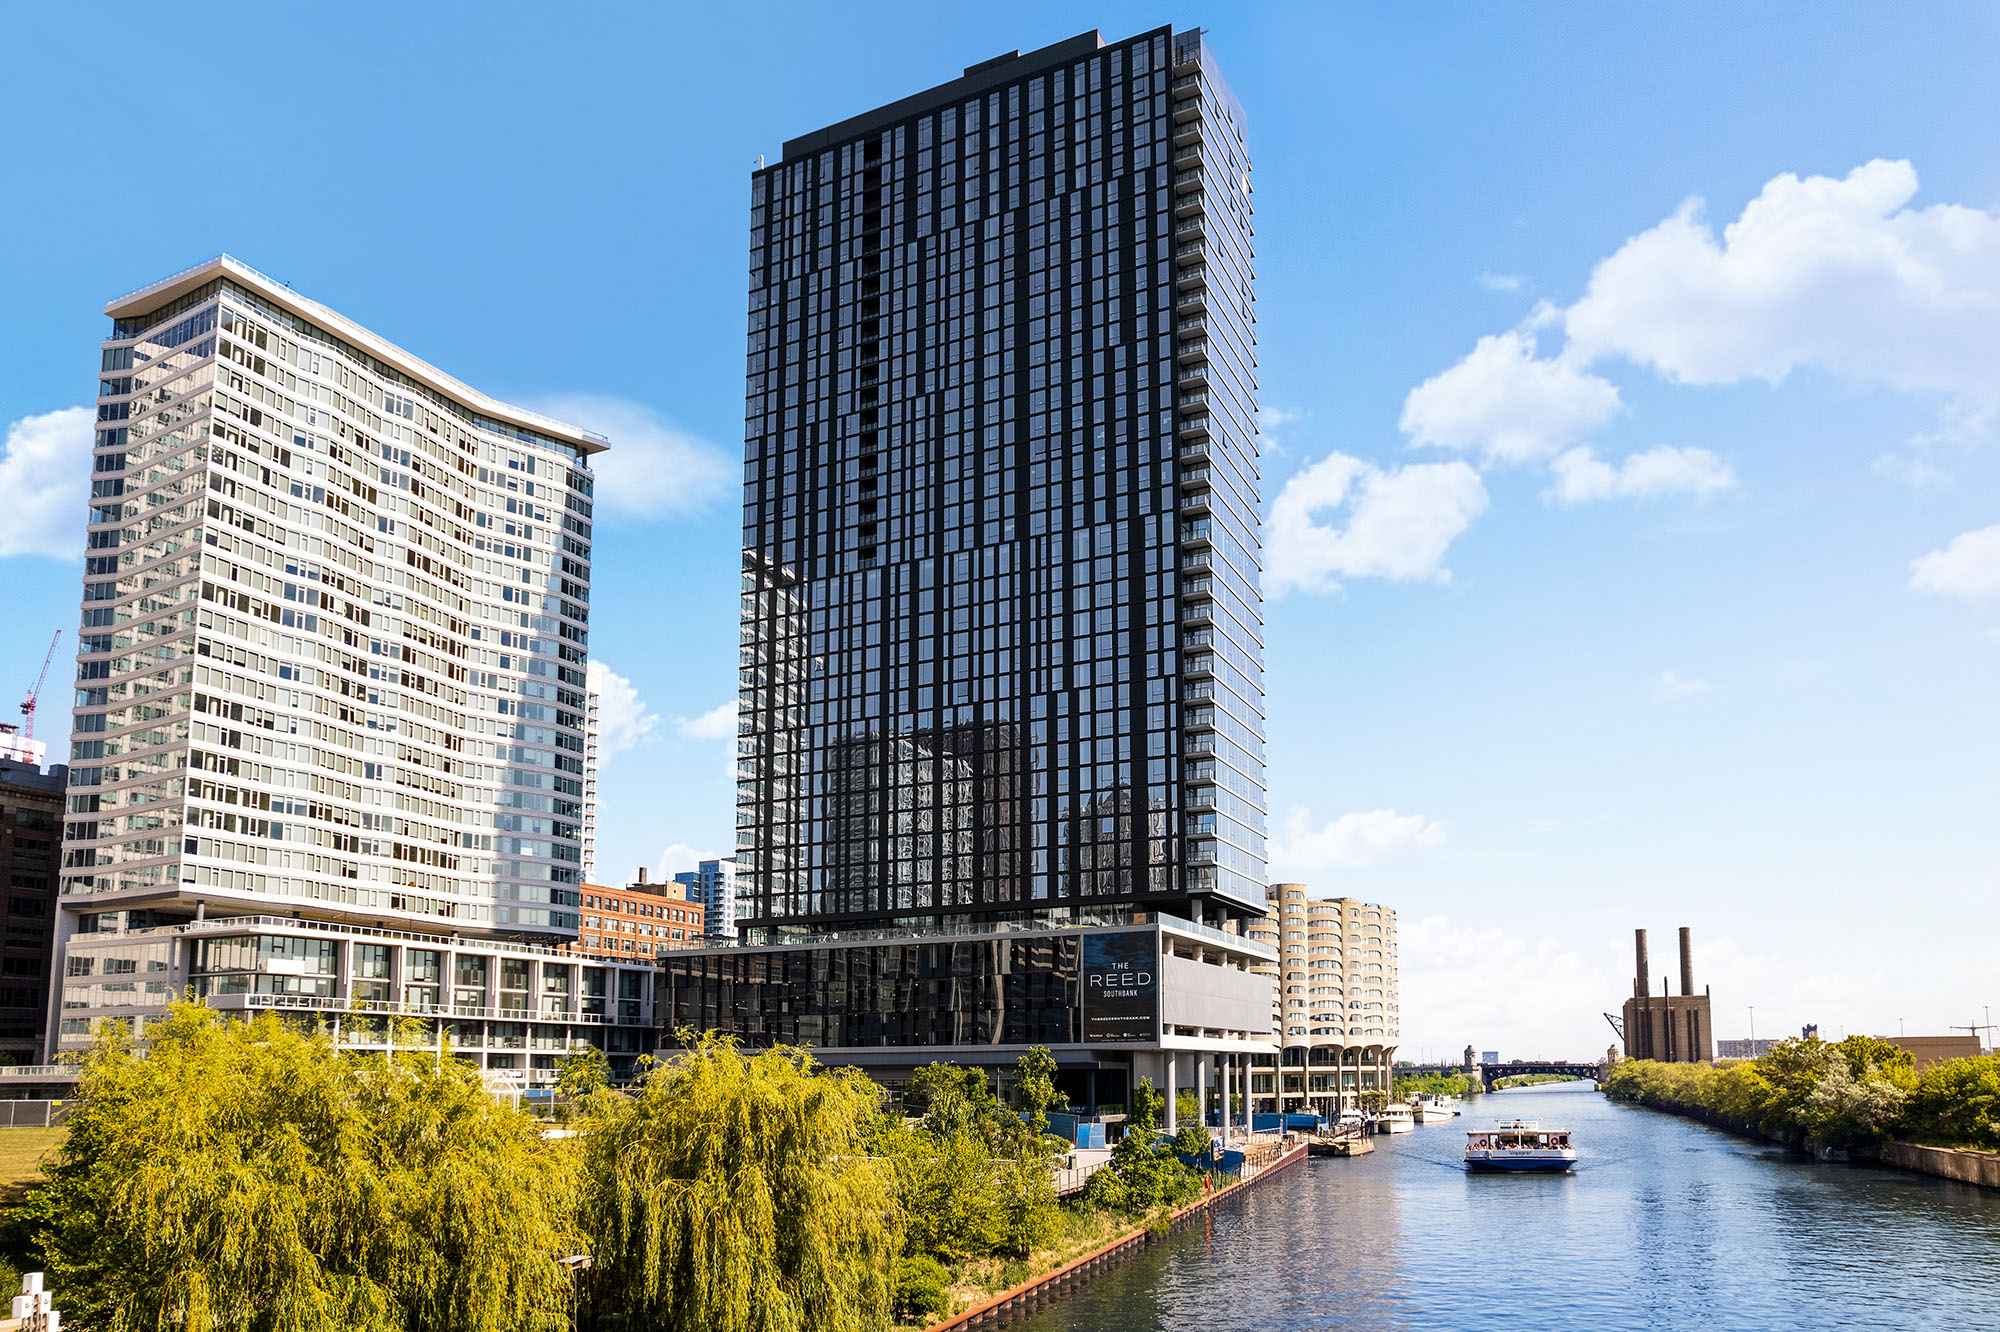 The Reed at Southbank, a 41-story residential tower